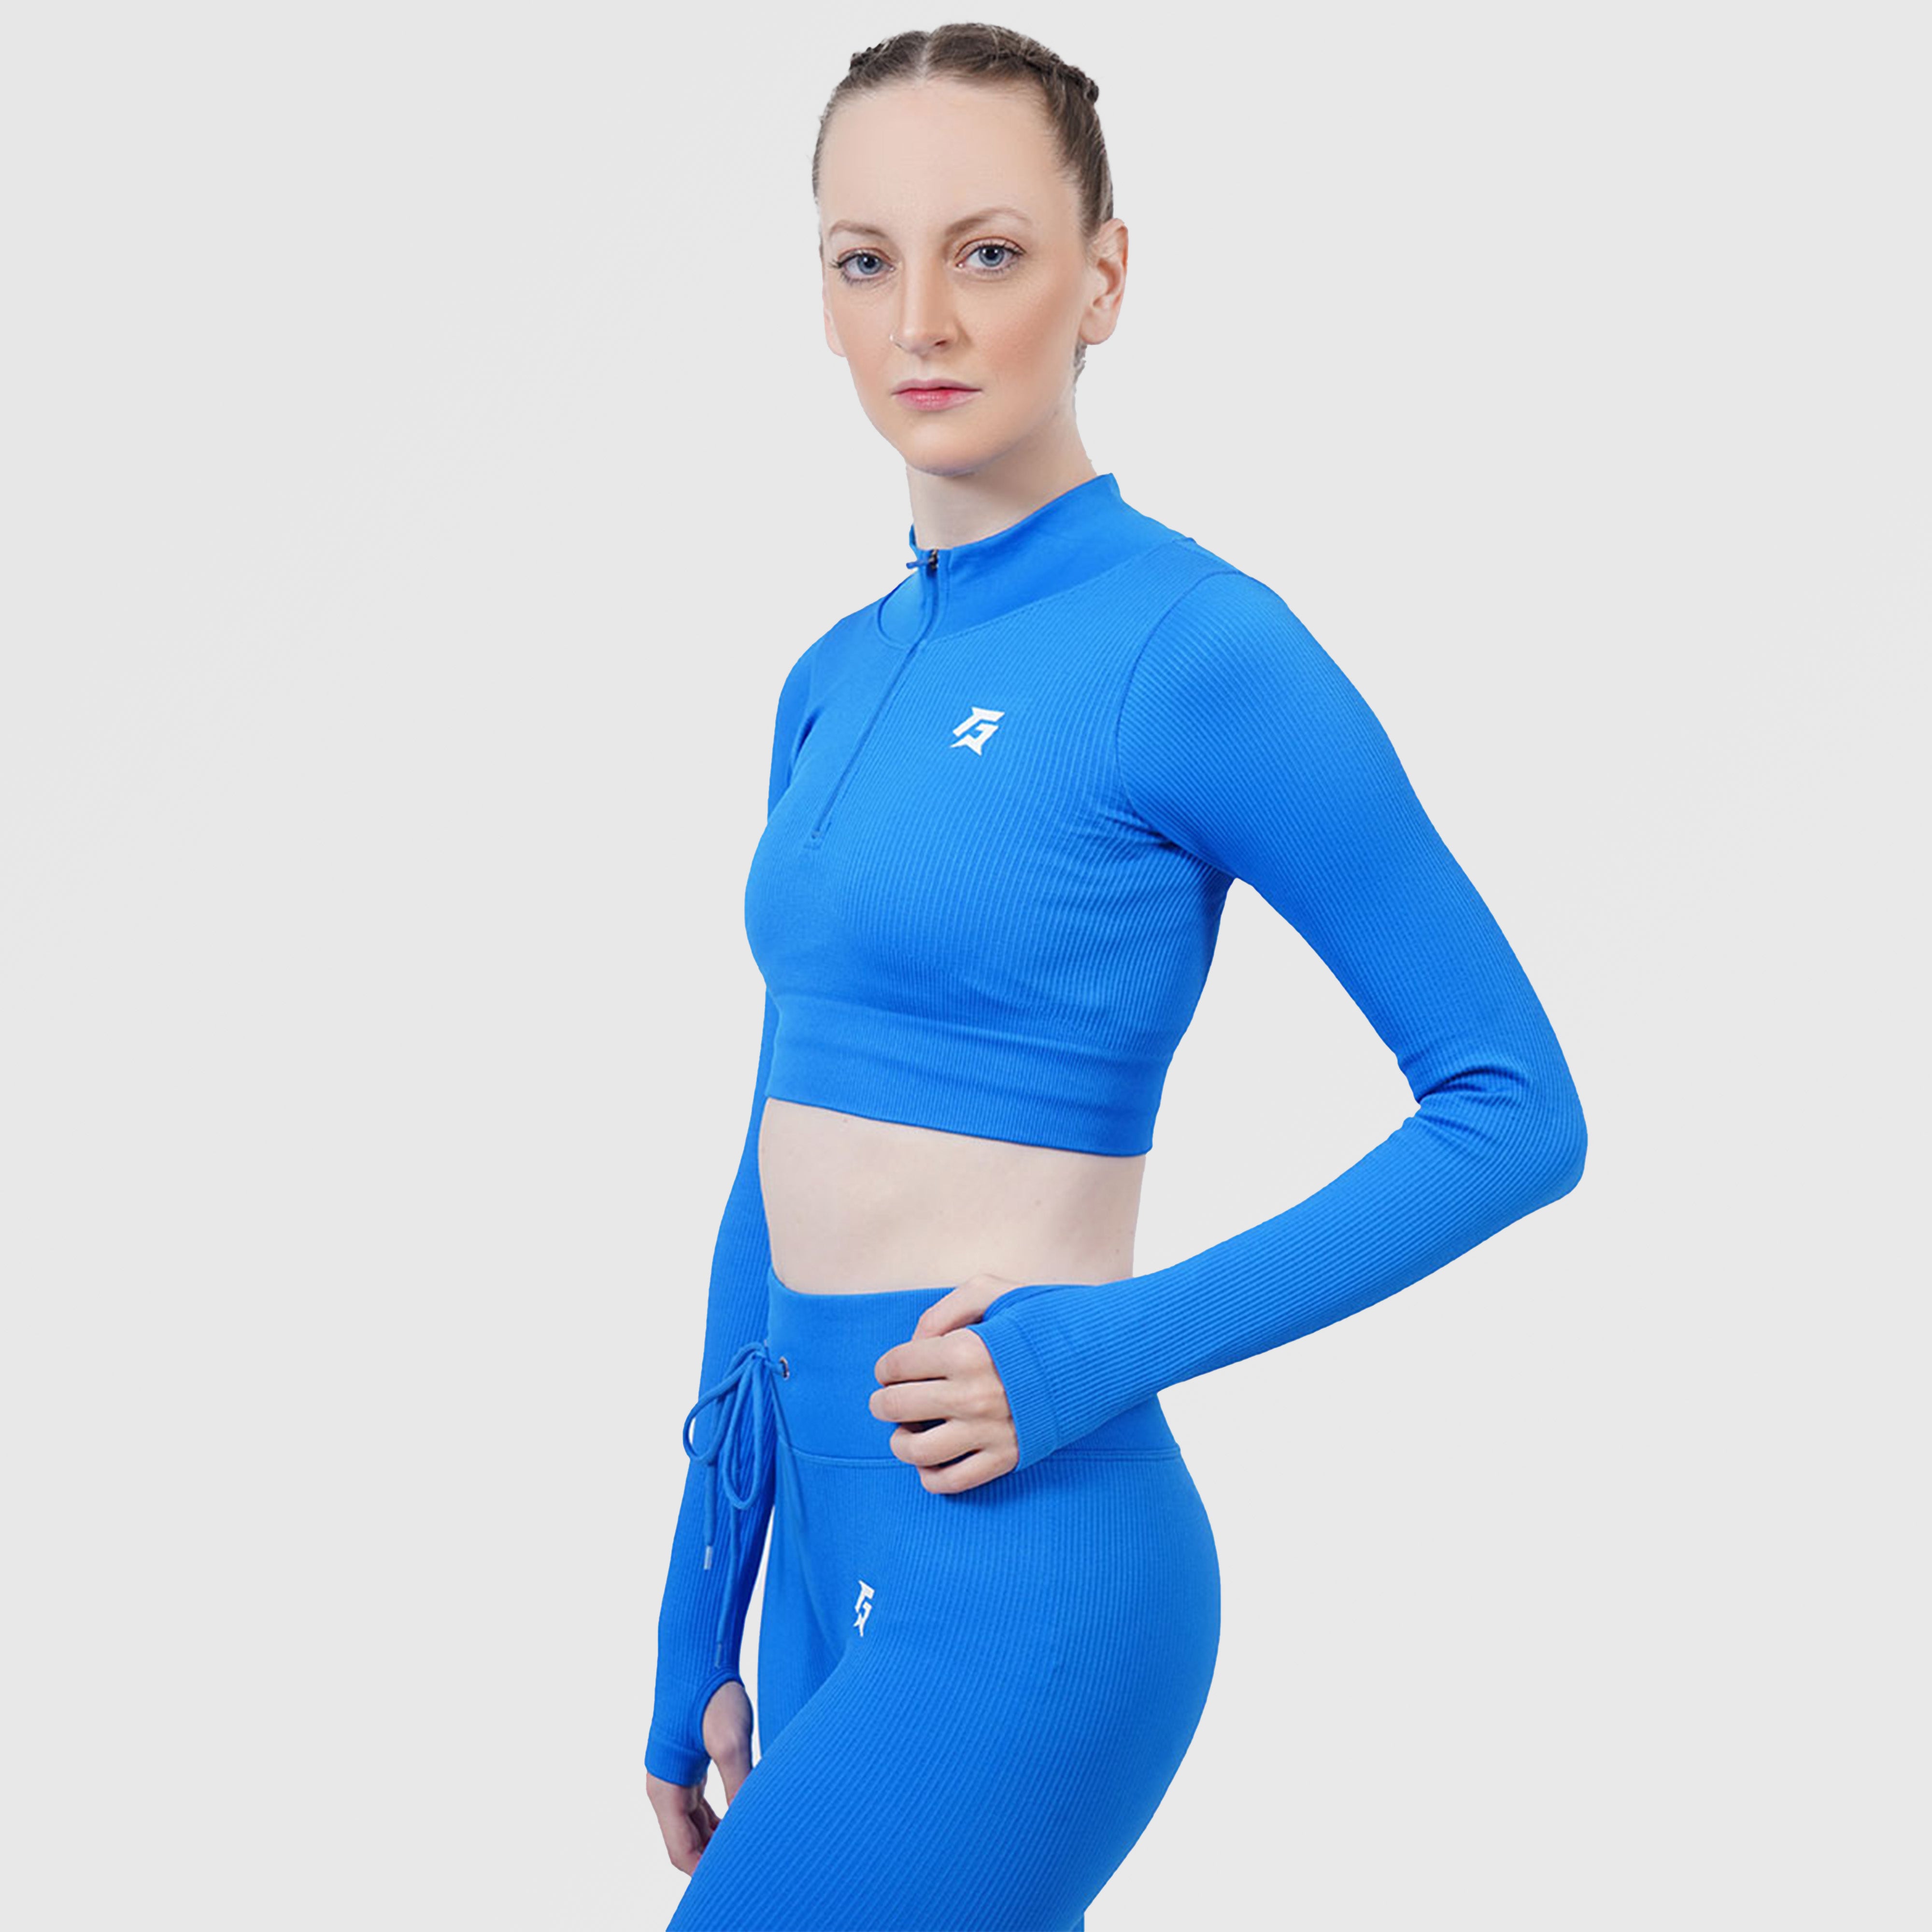 Fitness Ribbed Crop Top (Blue)